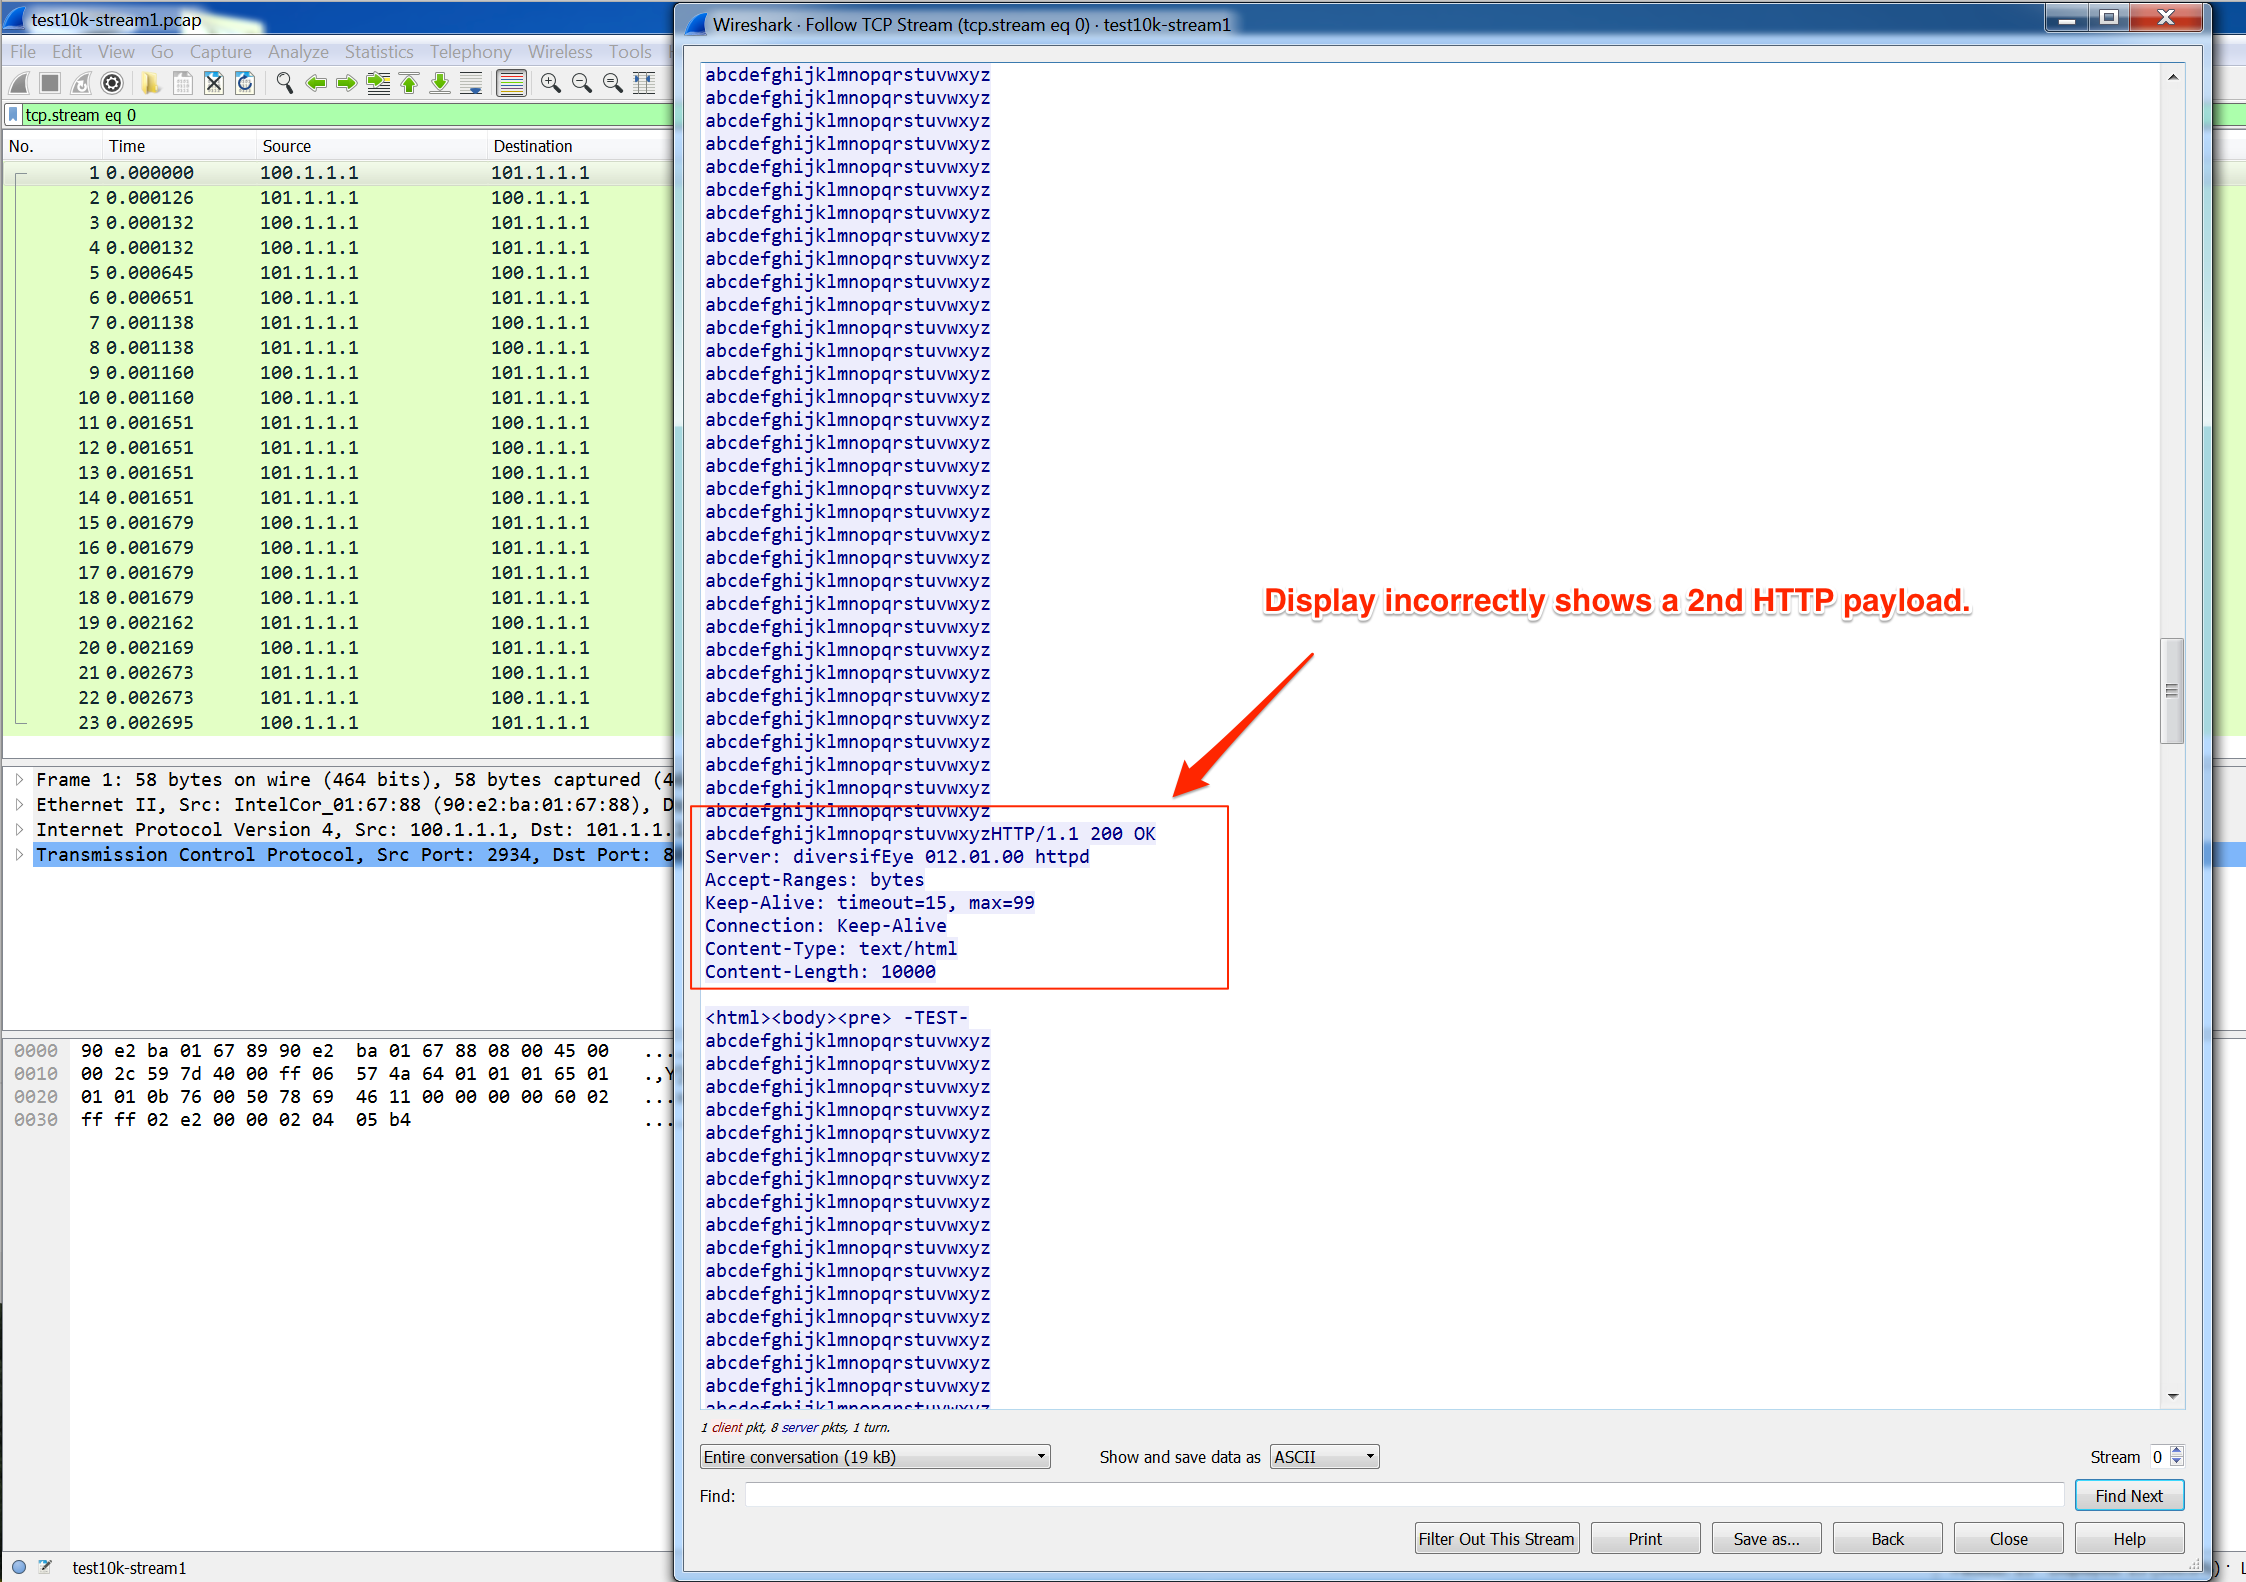 wireshark pcap follow udp stream save to raw command line